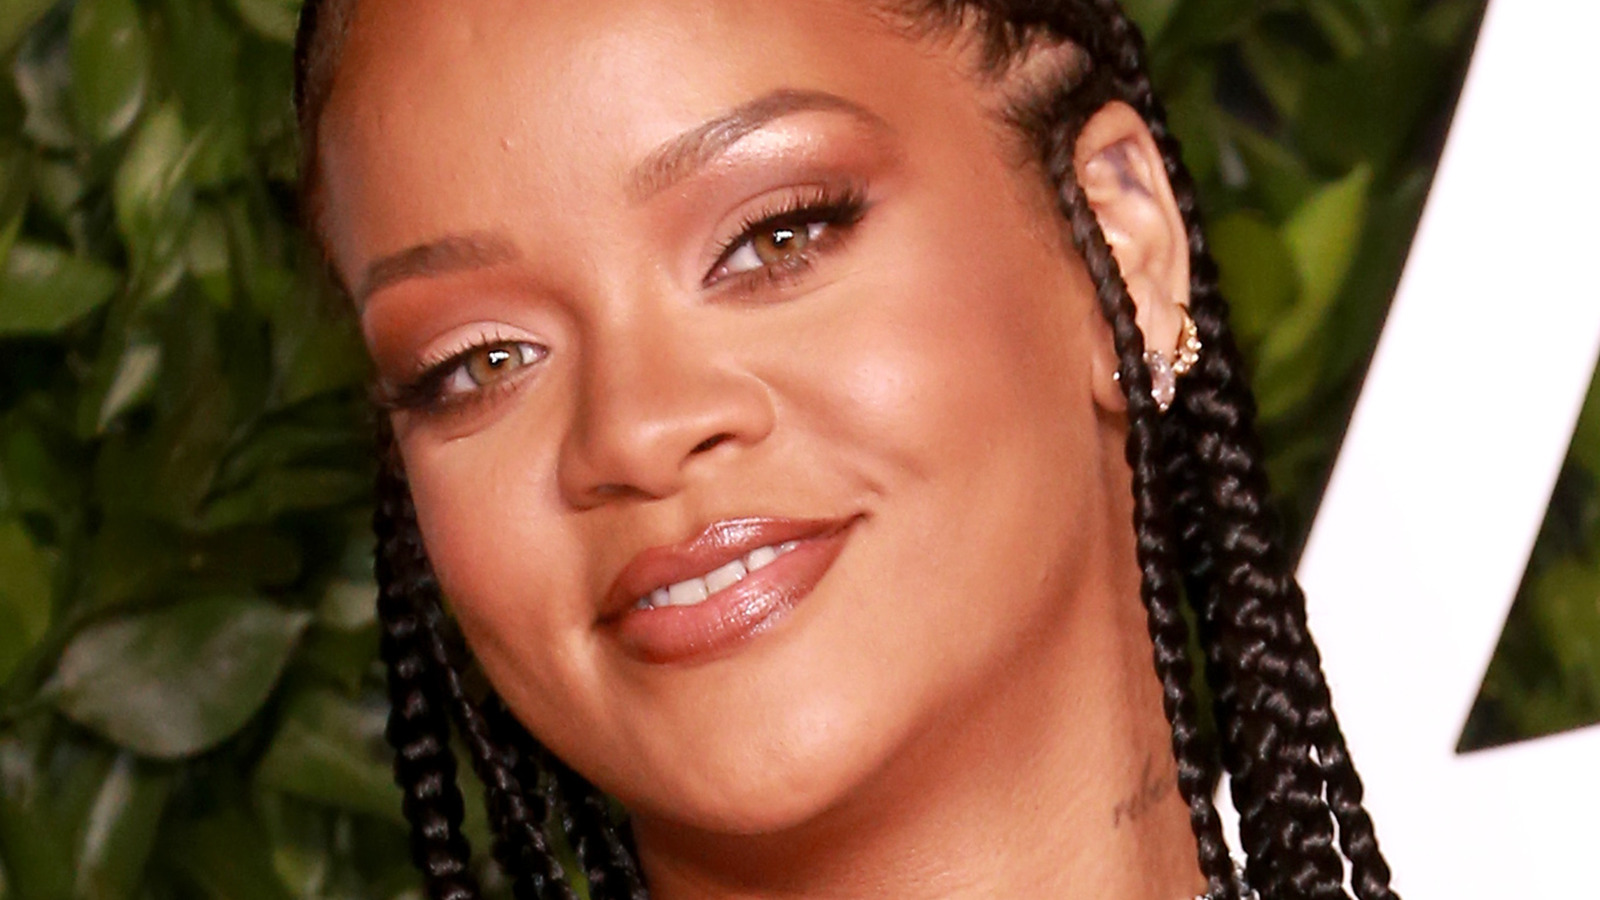 How does Rihanna feel about becoming a billionaire?